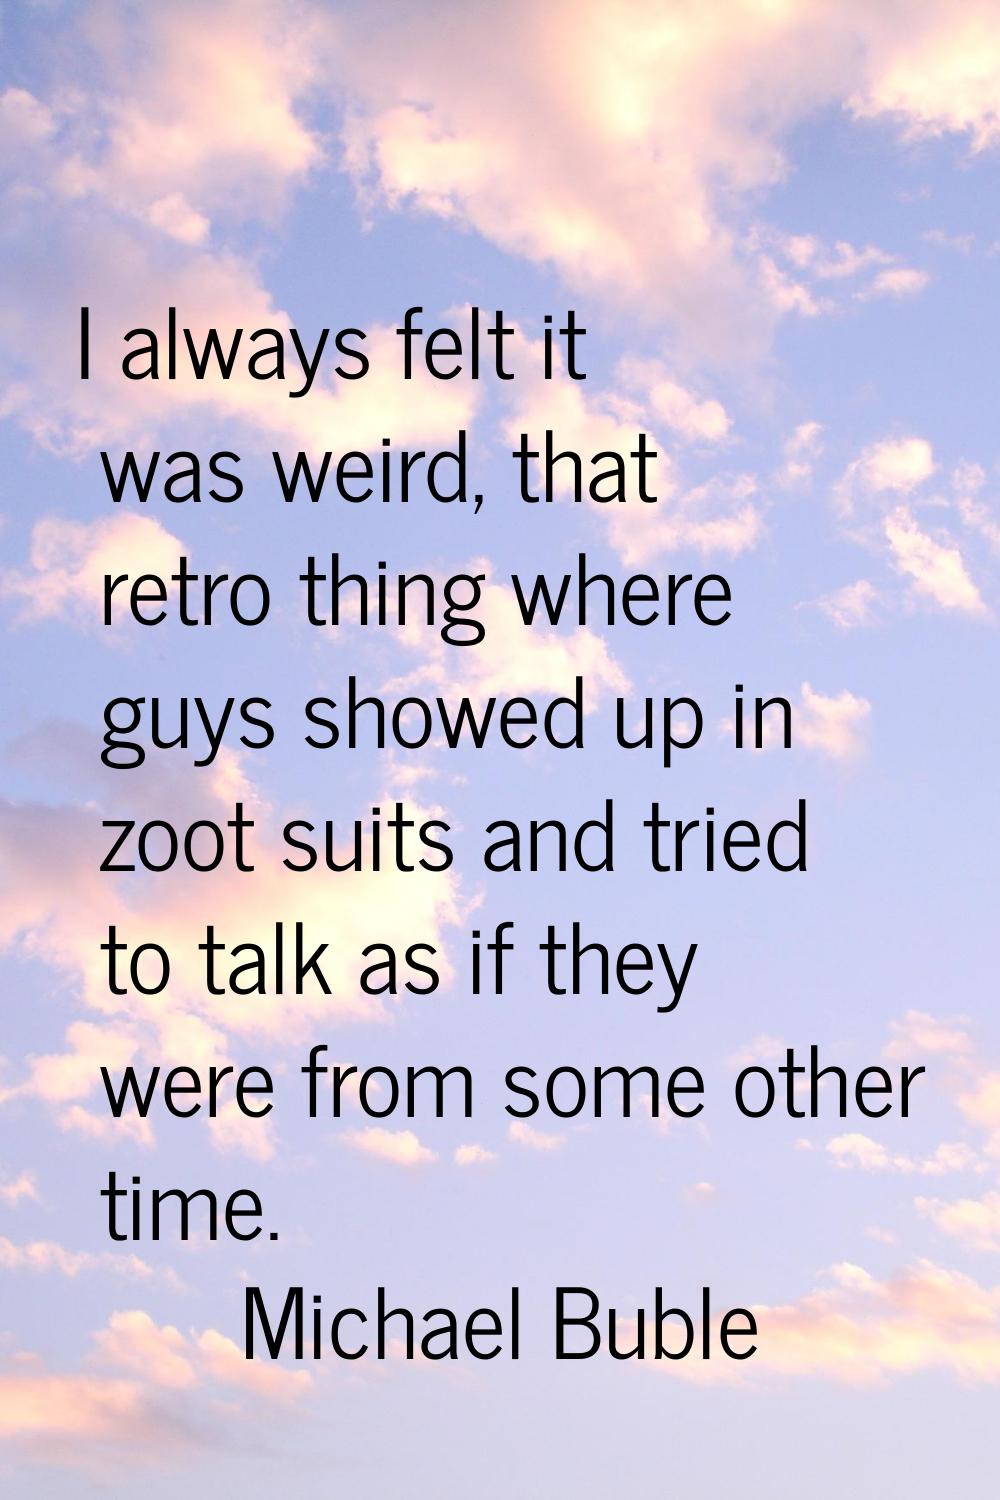 I always felt it was weird, that retro thing where guys showed up in zoot suits and tried to talk a